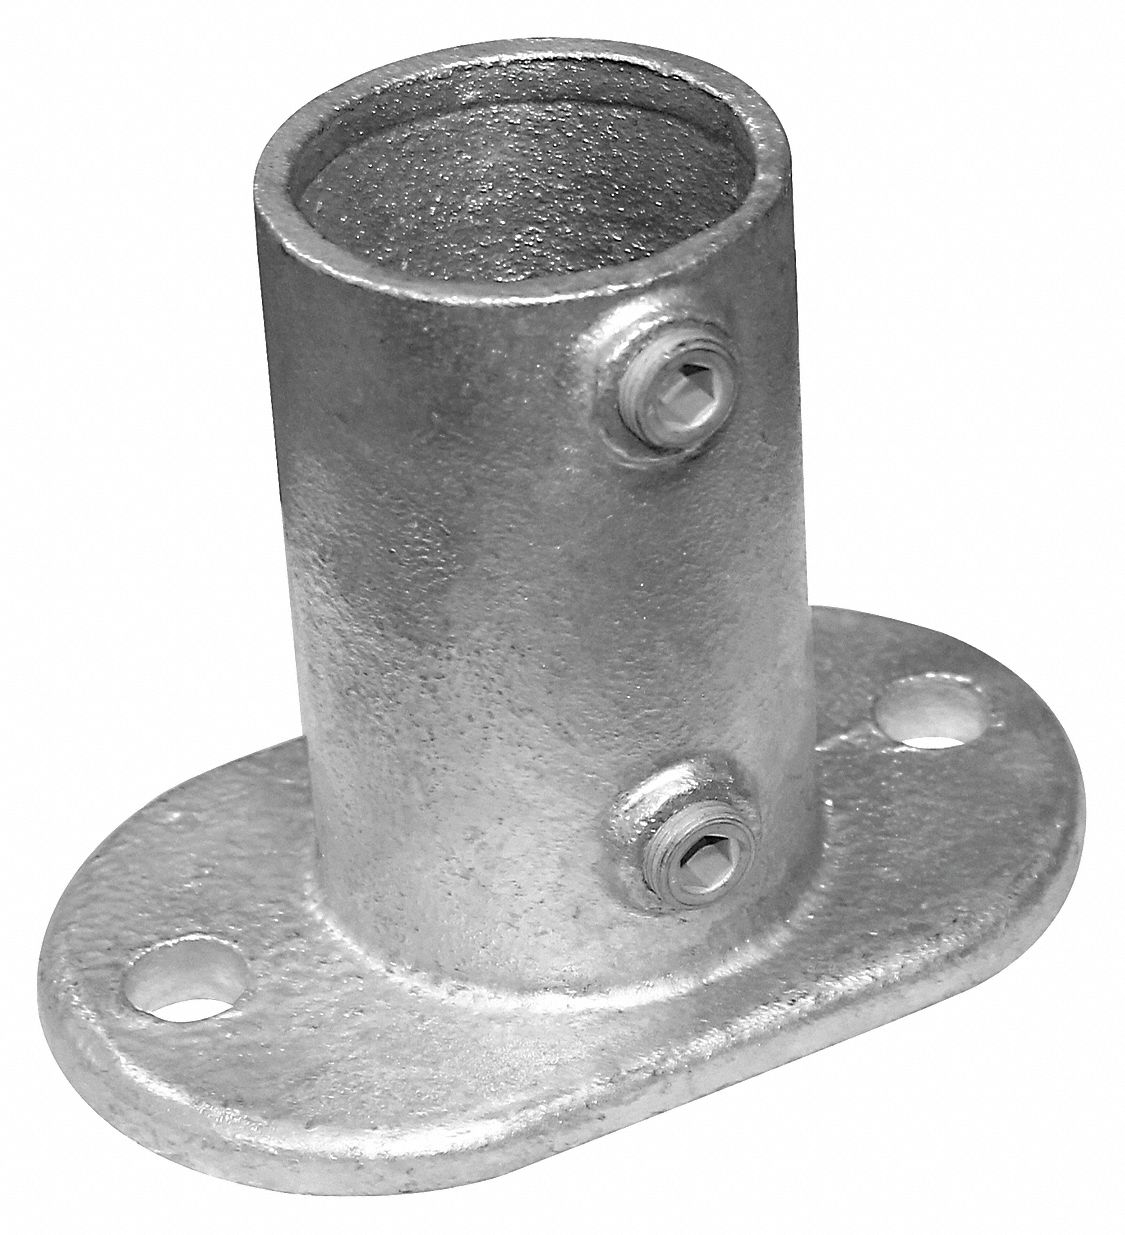 Grainger Approved Structural Pipe Fitting Fitting Type Railing Base Flange Mounting Type Clamp 7157